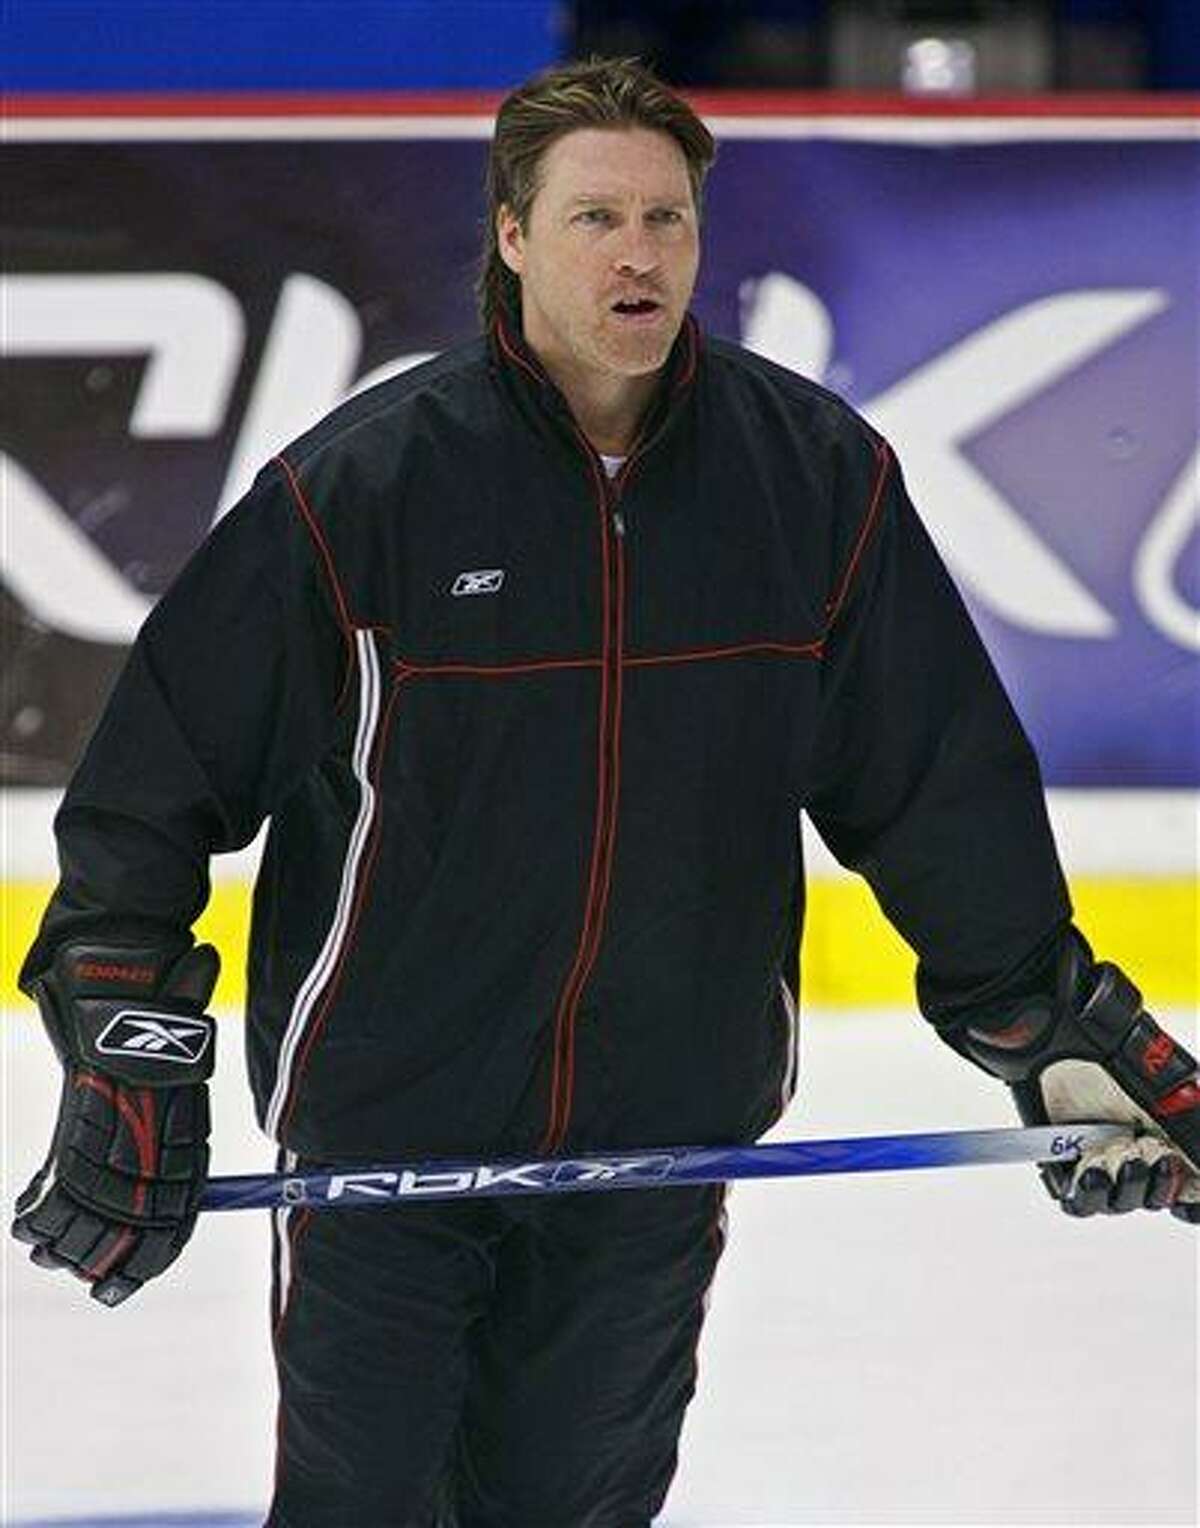 FILE- Inthis May 27, 2006, file photo, Quebec Remparts coach Patrick Roy puts his squad through hockey practice in Moncton, New Brunswick. The Colorado Avalanche announced Thursday, May 23, 2013, that they hired Patrick Roy as their new head coach. (AP Photo/The Canadian Press, Andrew Vaughan, File)